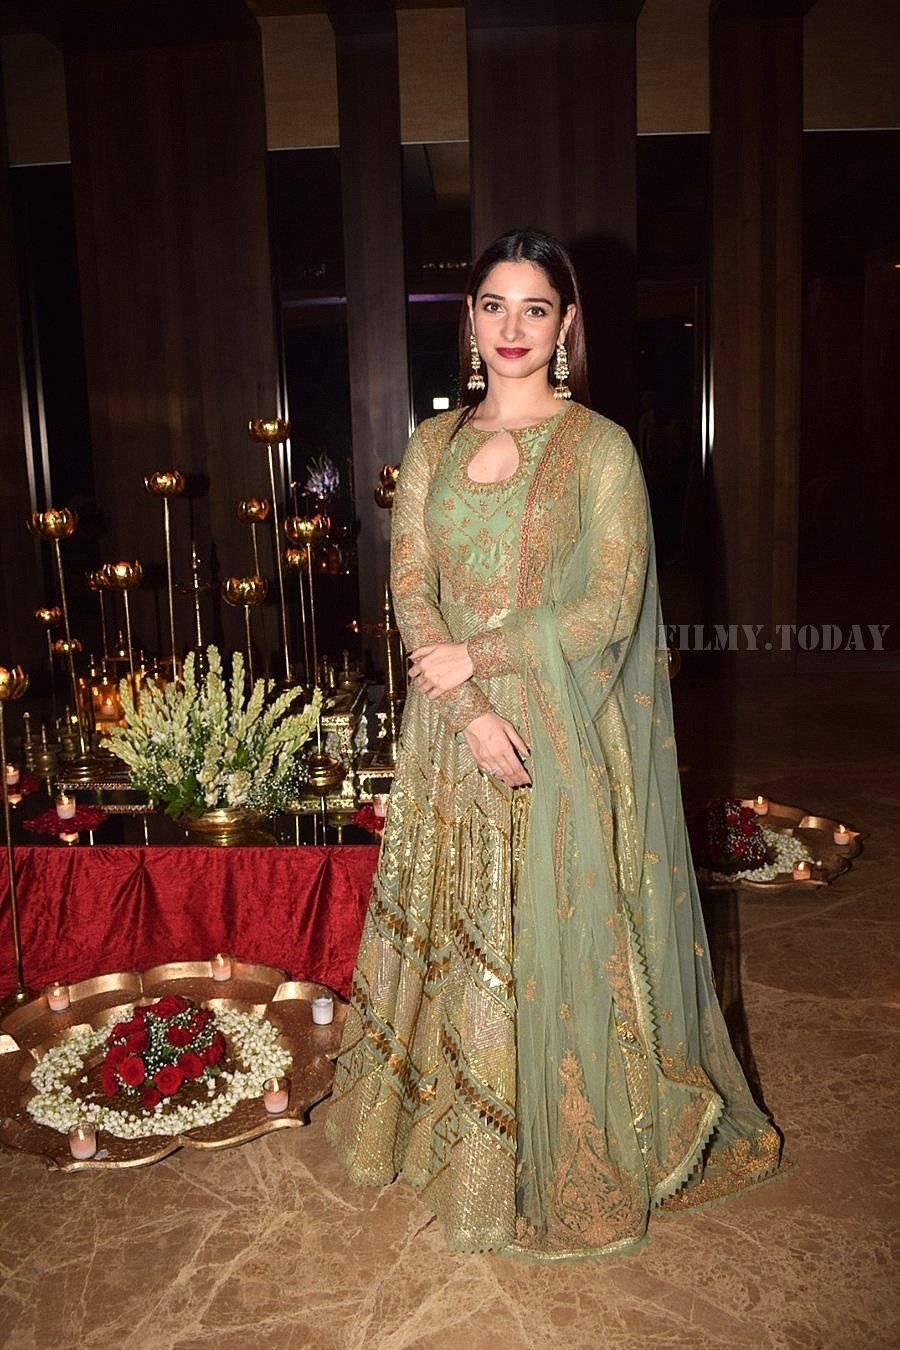 Tamanna Bhatia - In Pics: Celebs At Producer Ramesh Taurani Diwali Party | Picture 1537185